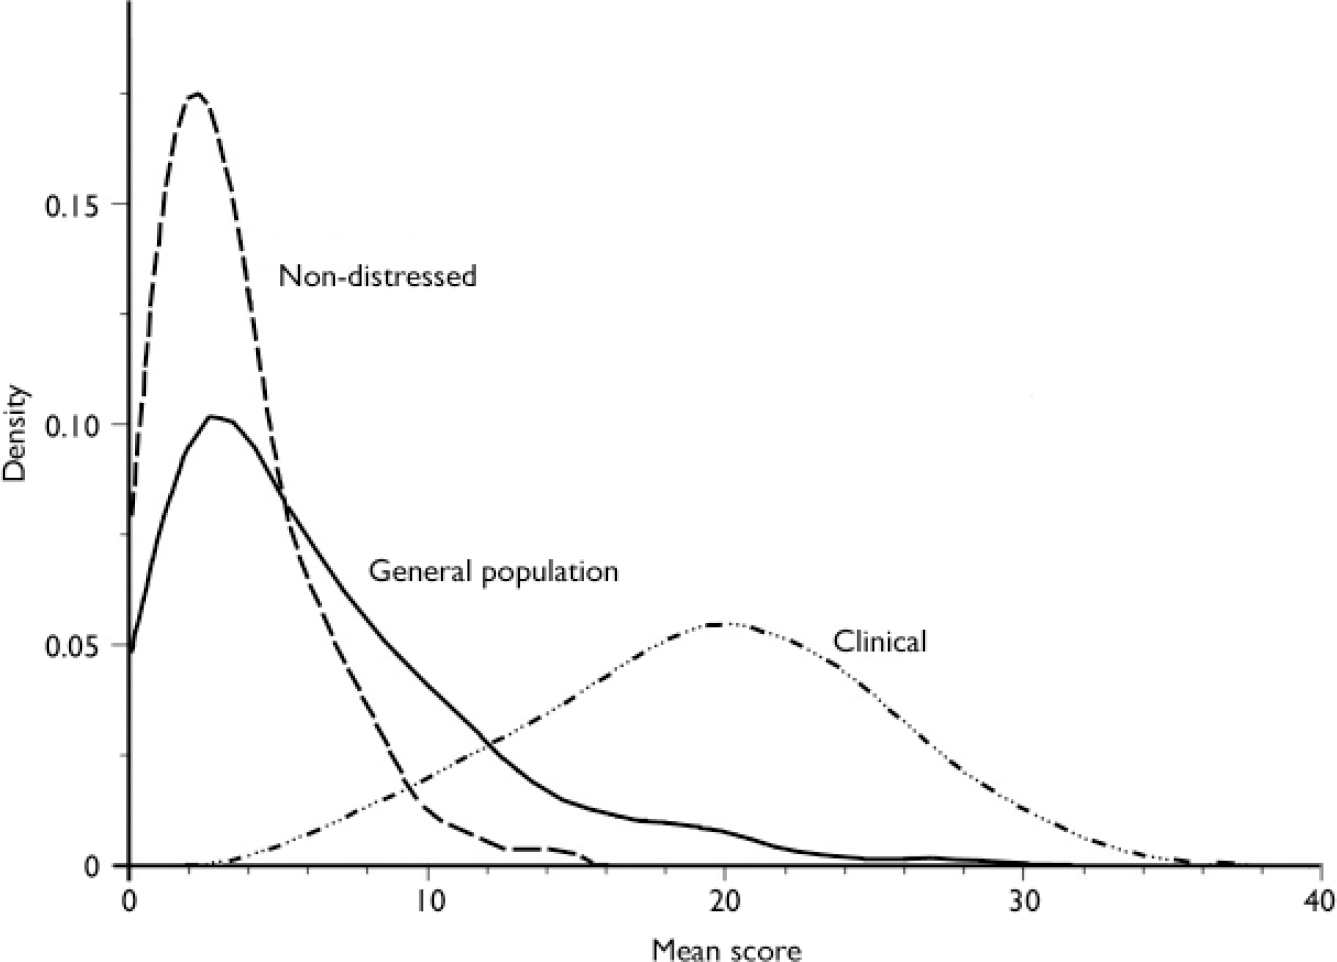 Distribution of CORE–OM scores in a general population, clinical